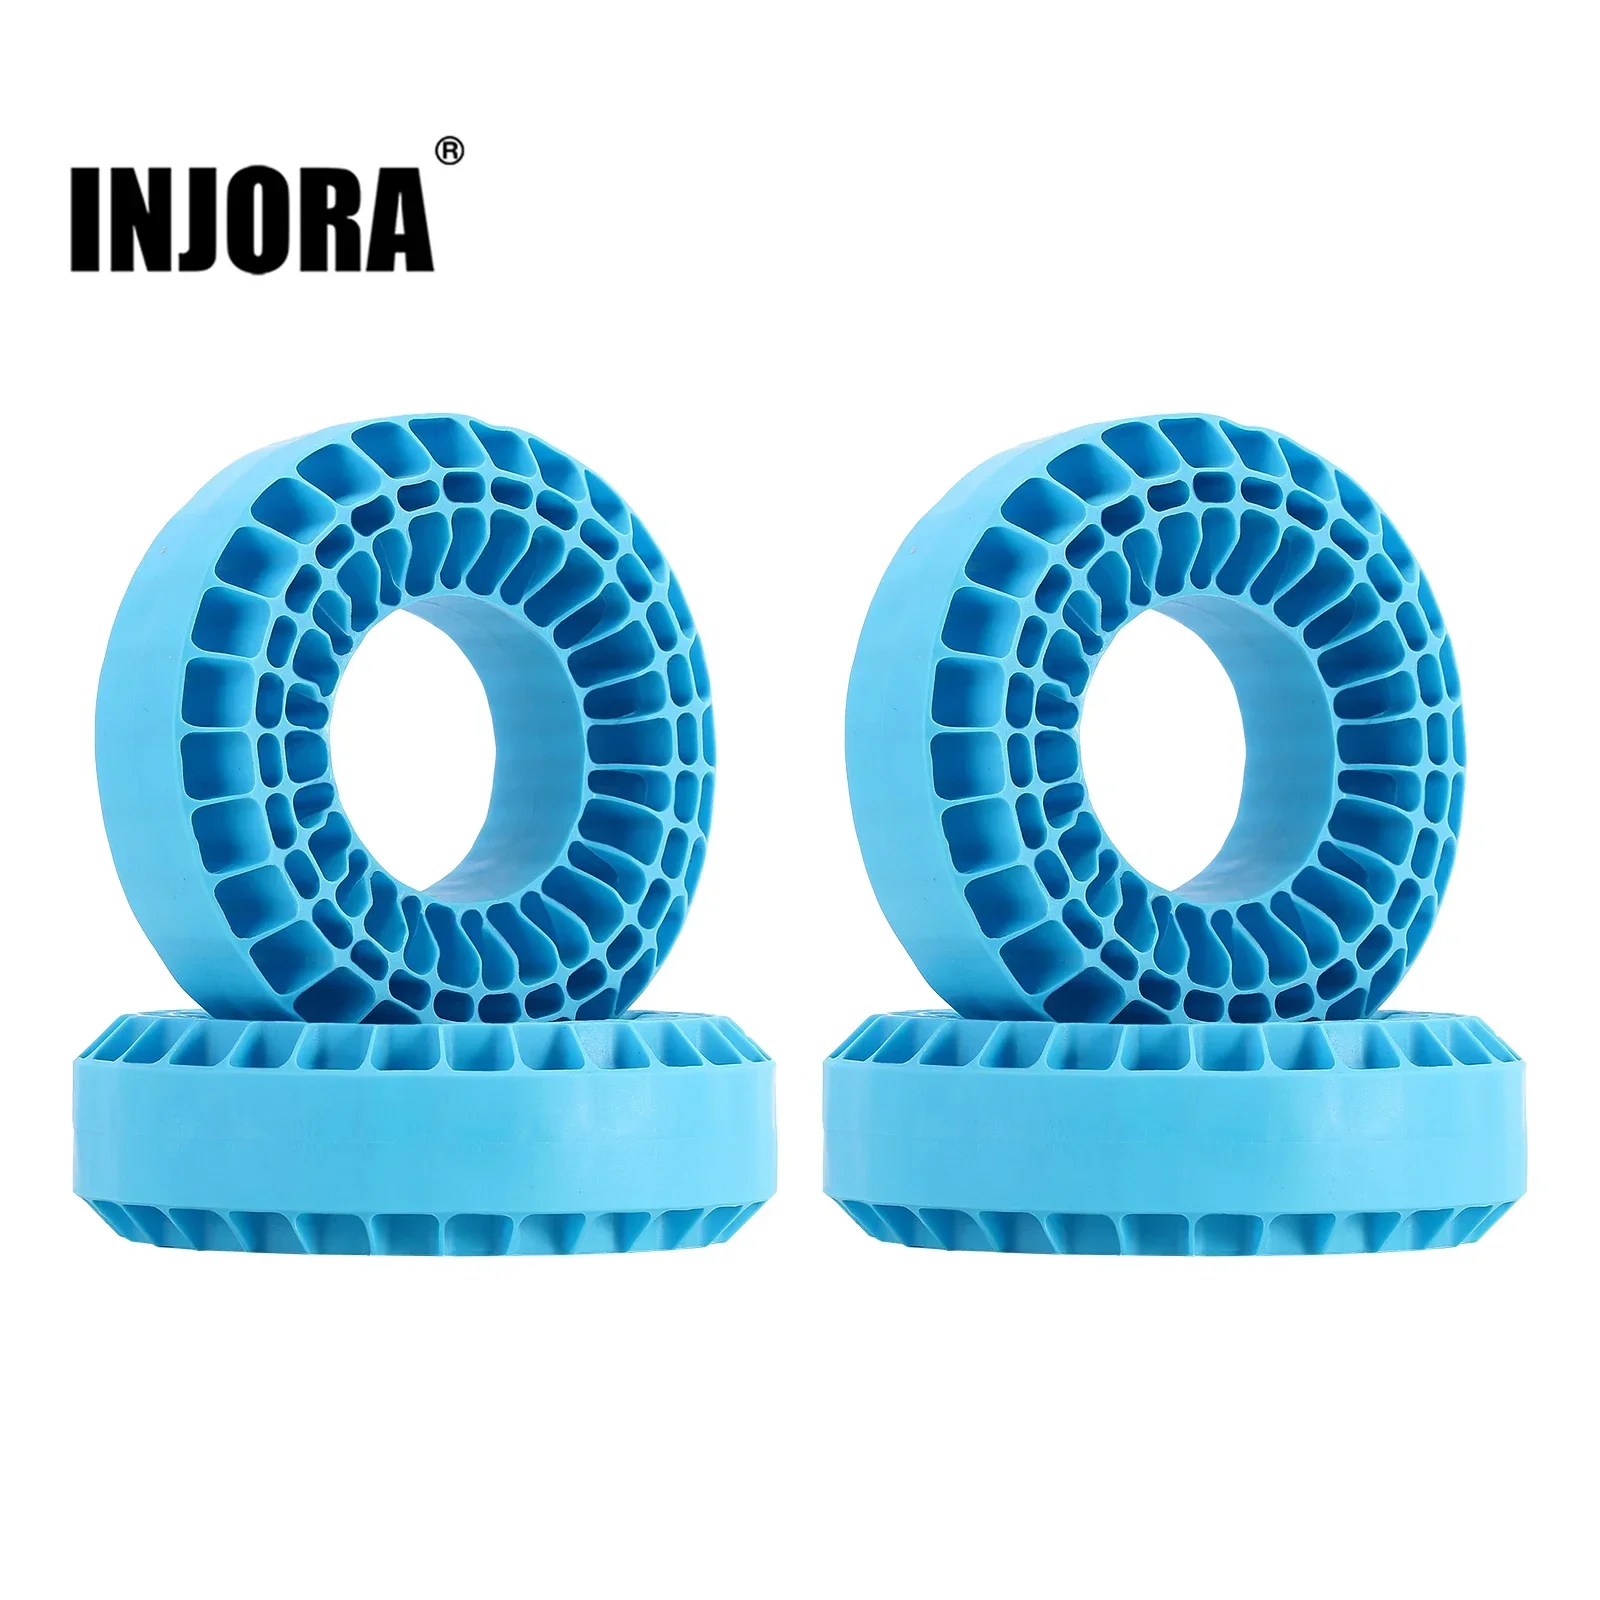 INJORA-Silicone-Rubber-Insert-Foam-Fit-118-122mm-1-9-Wheel-Tires-for-1-10-RC.webp